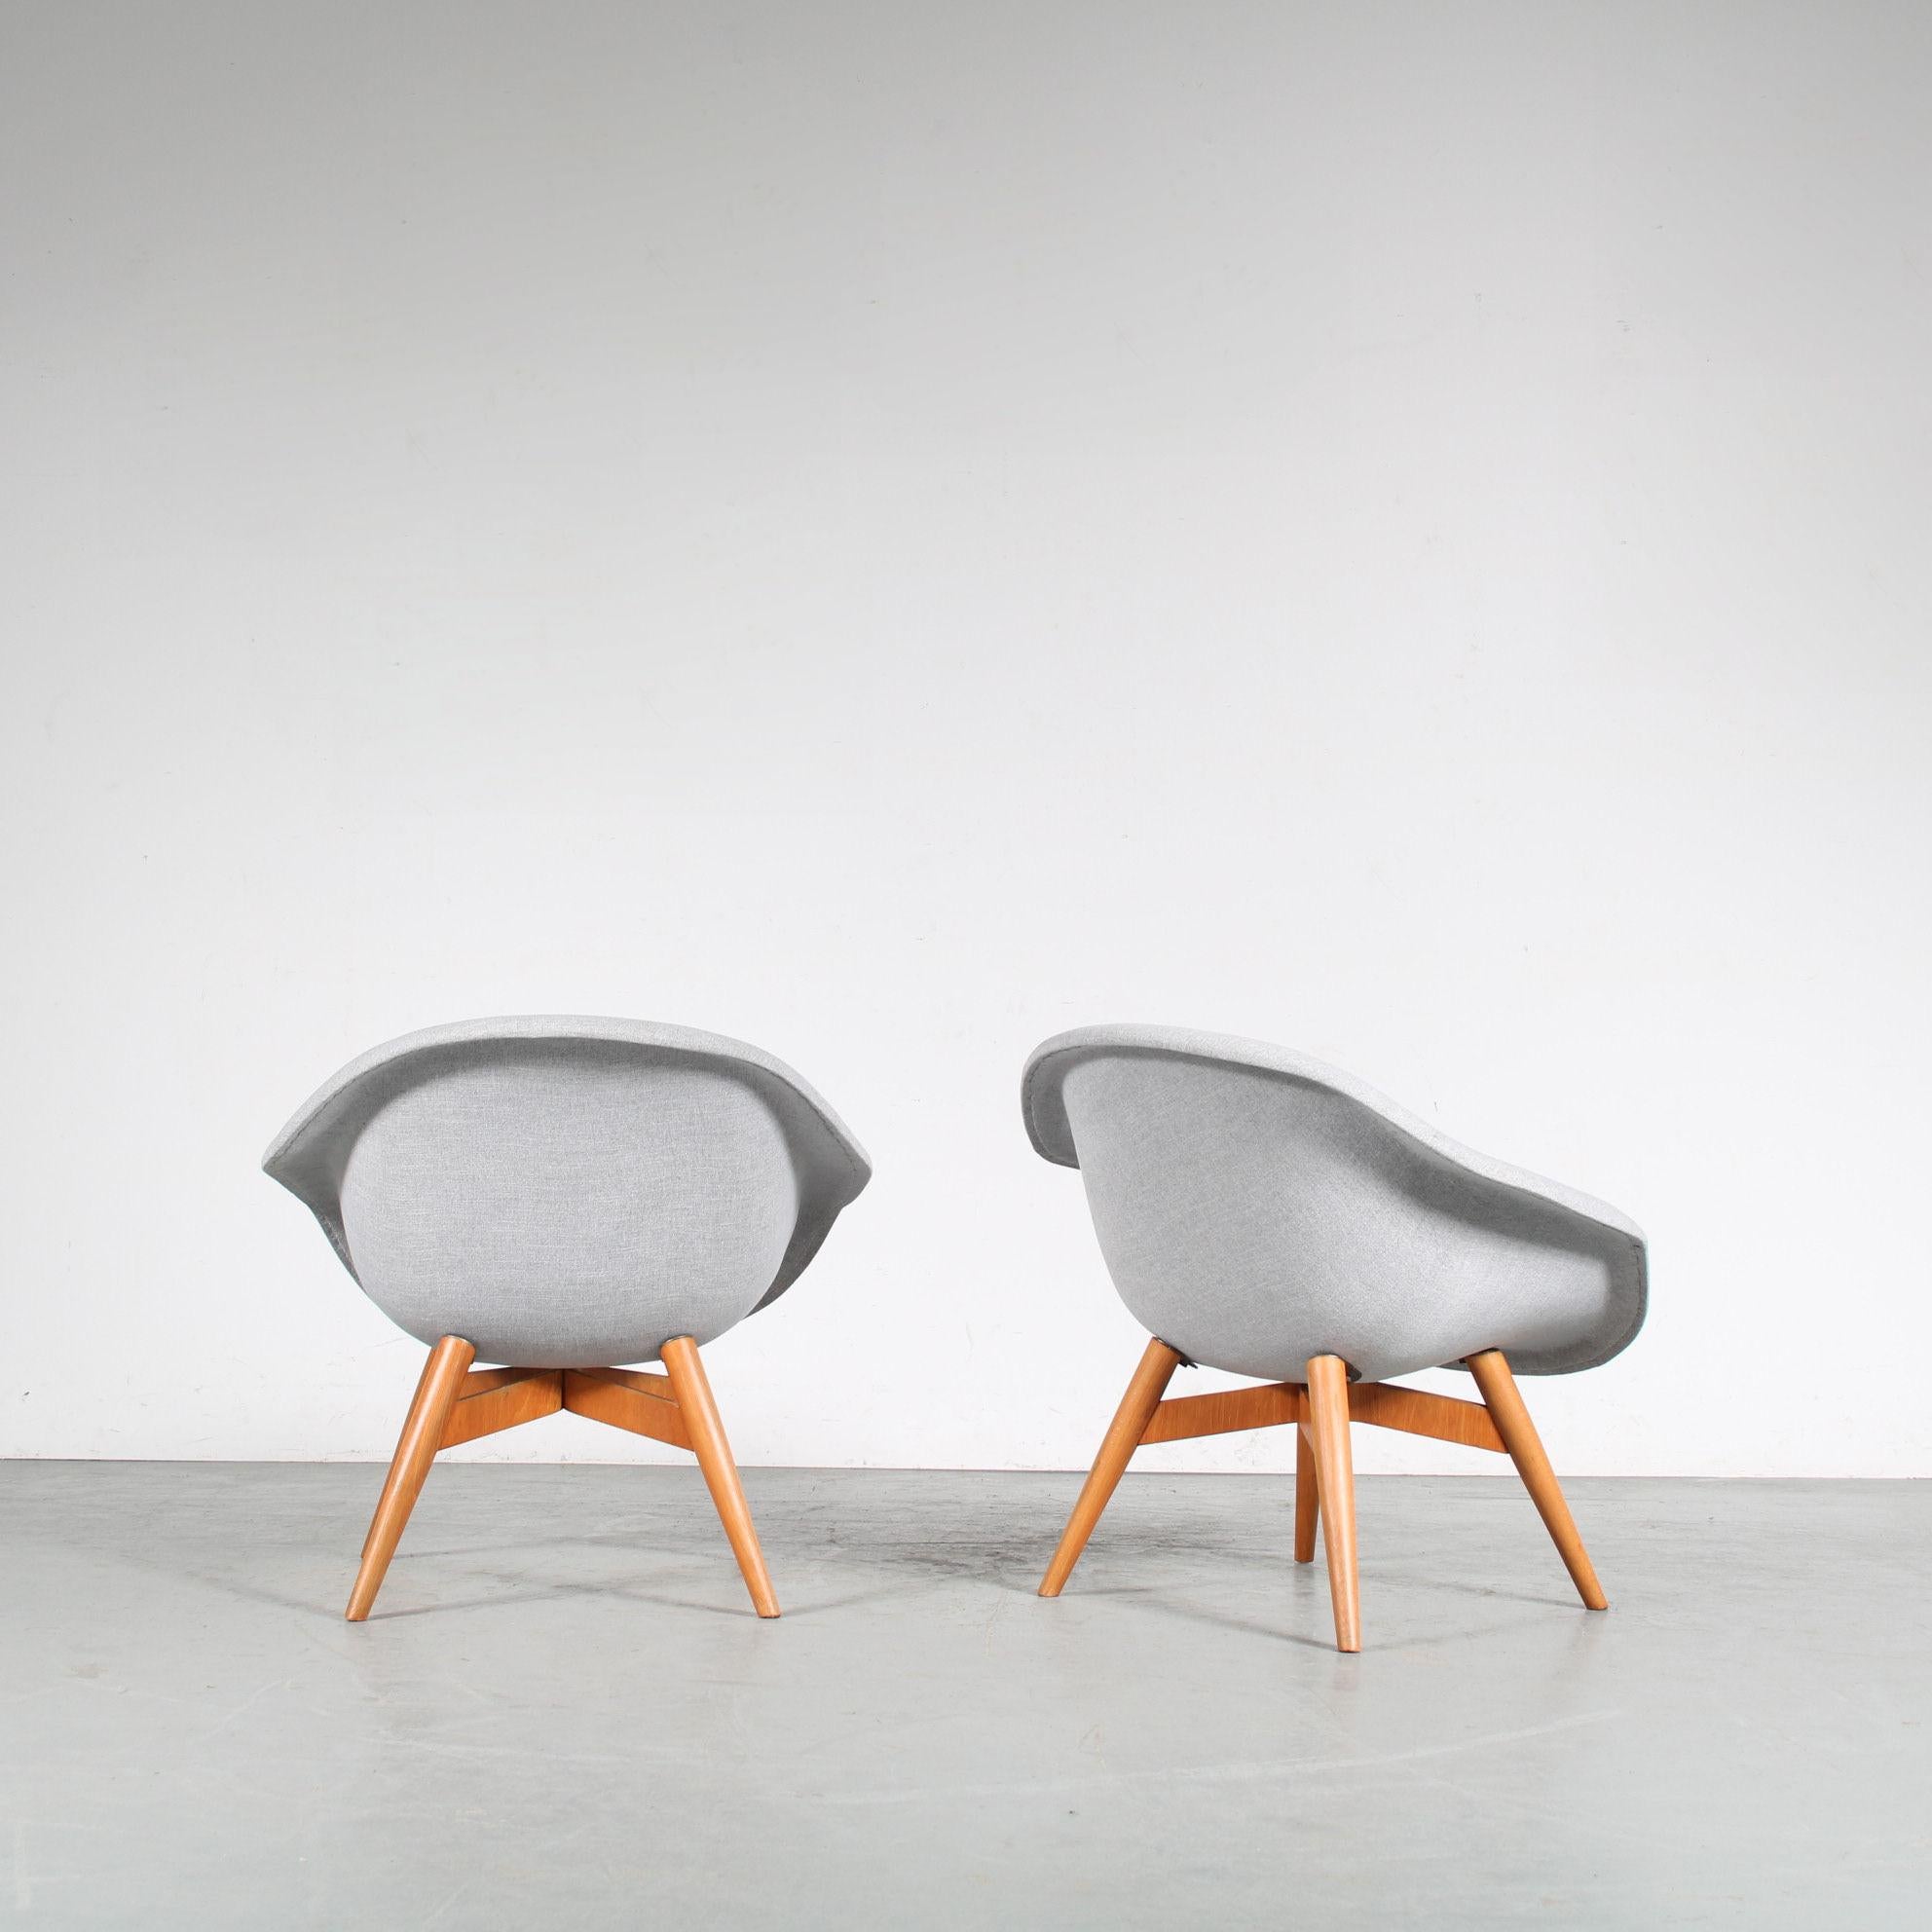 Pair of Frantisek Jirak Lounge Chairs from Czech, 1950 For Sale 3